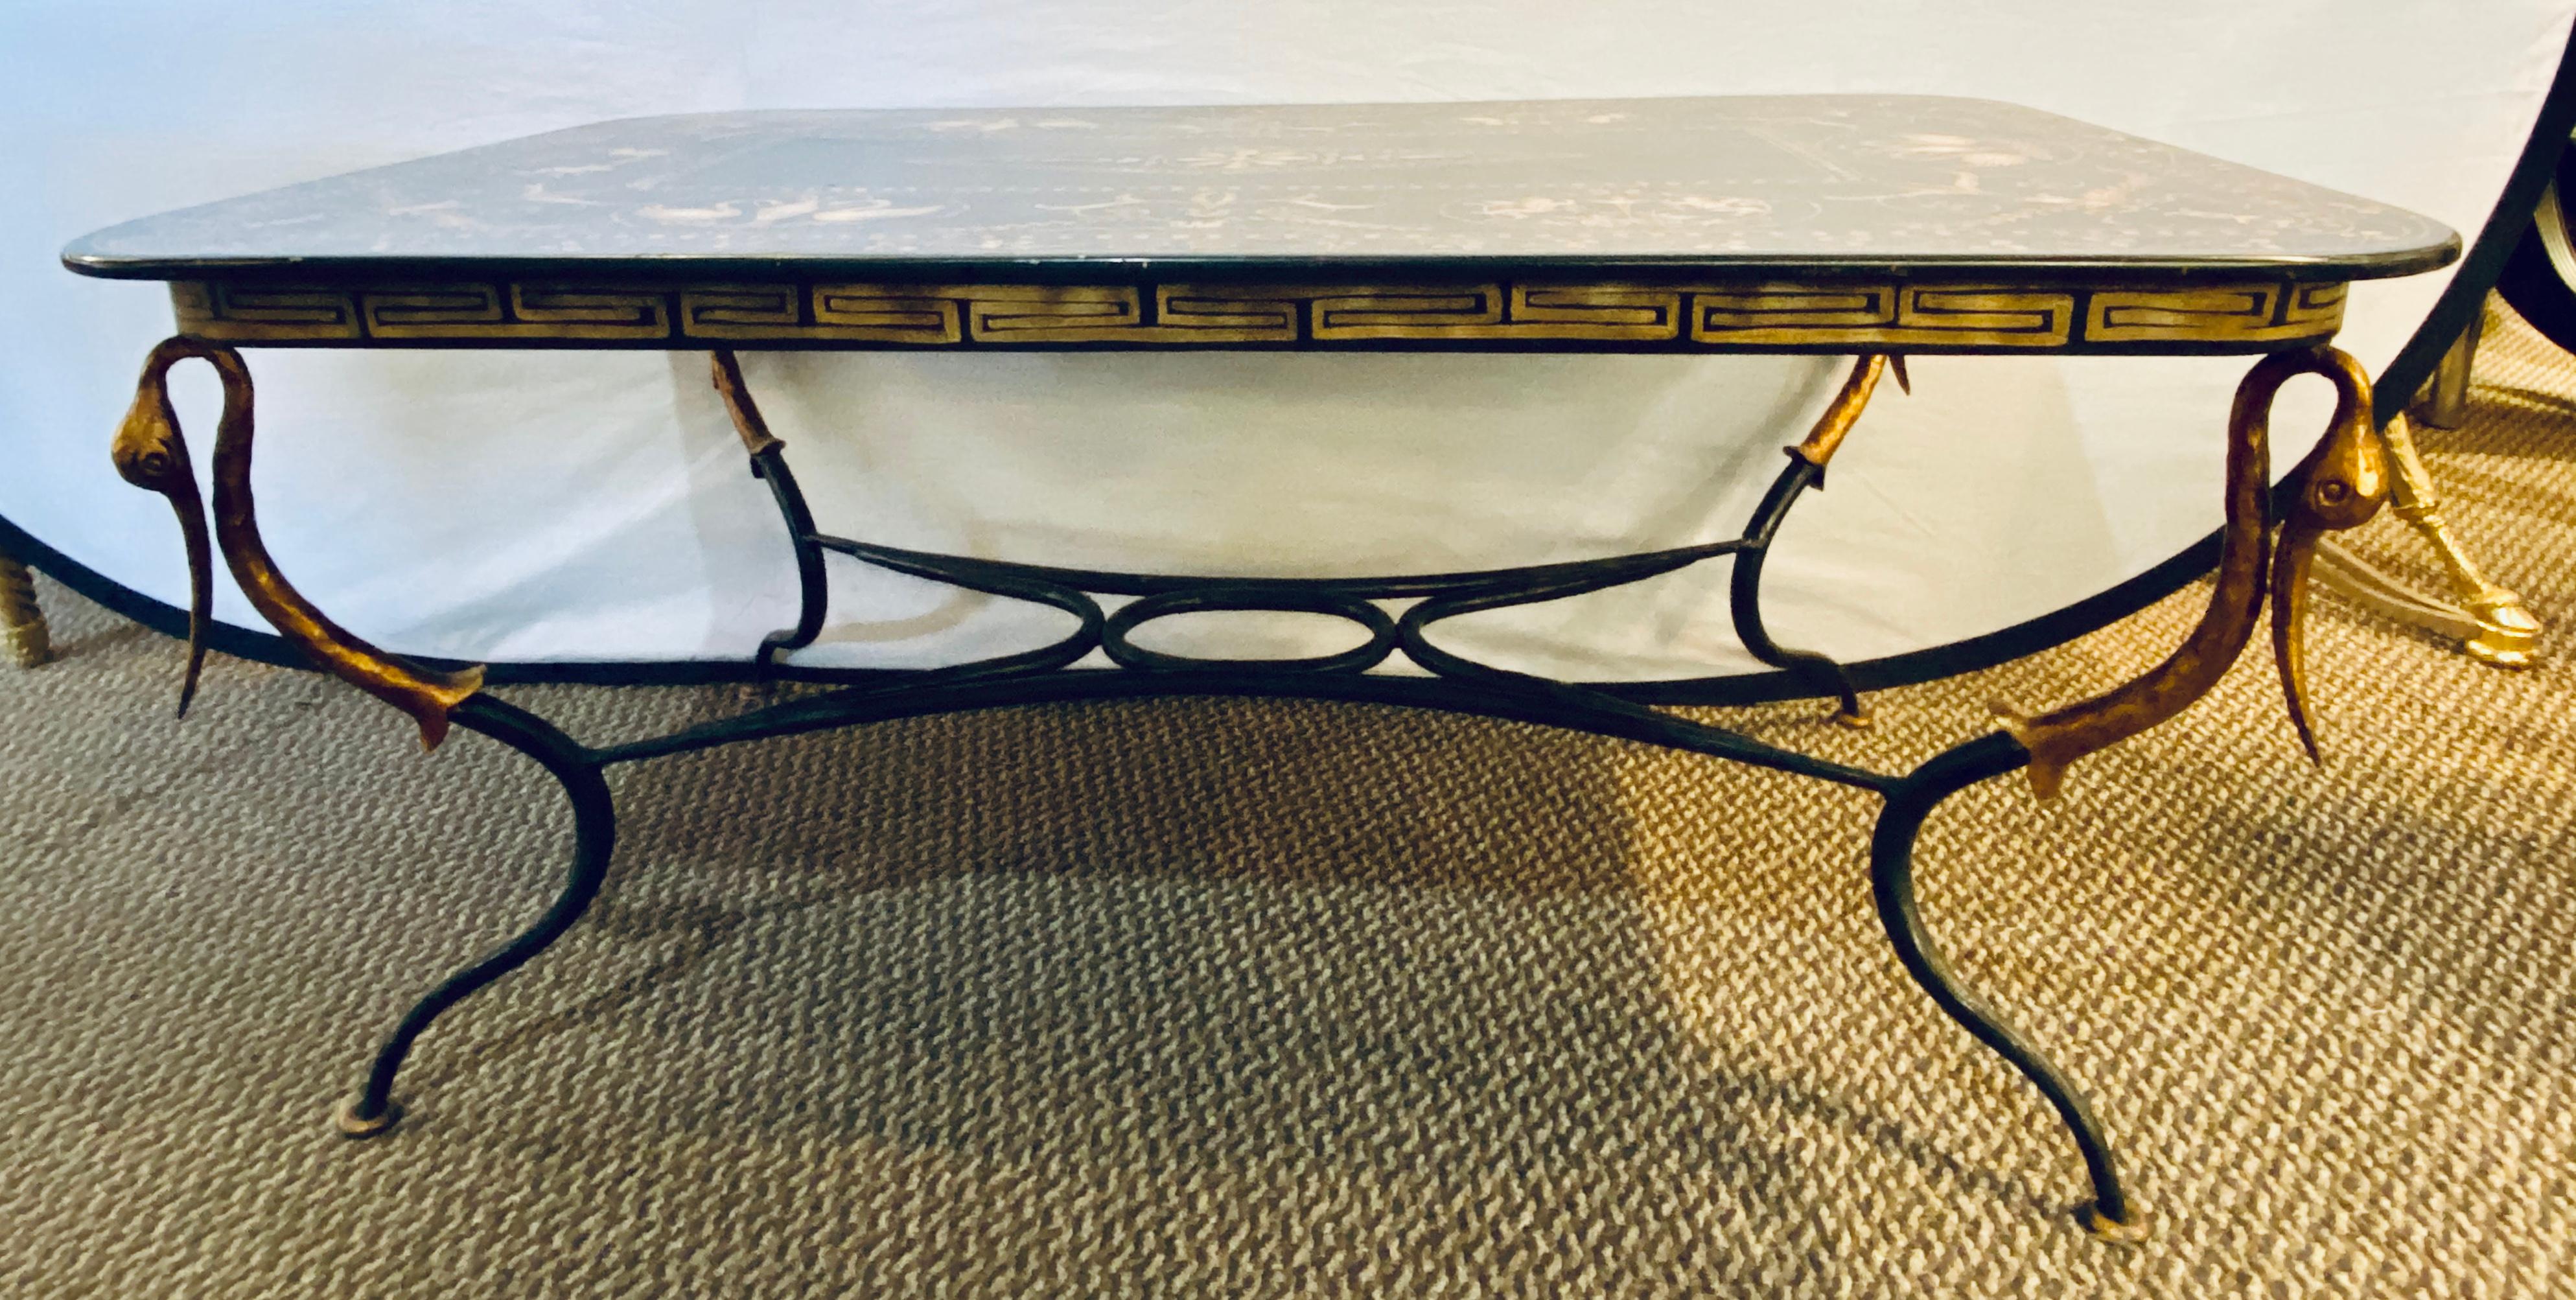 Trouvailles coffee table with toile paint decorated top on a gilt metal base and corner stork heads
EXA.